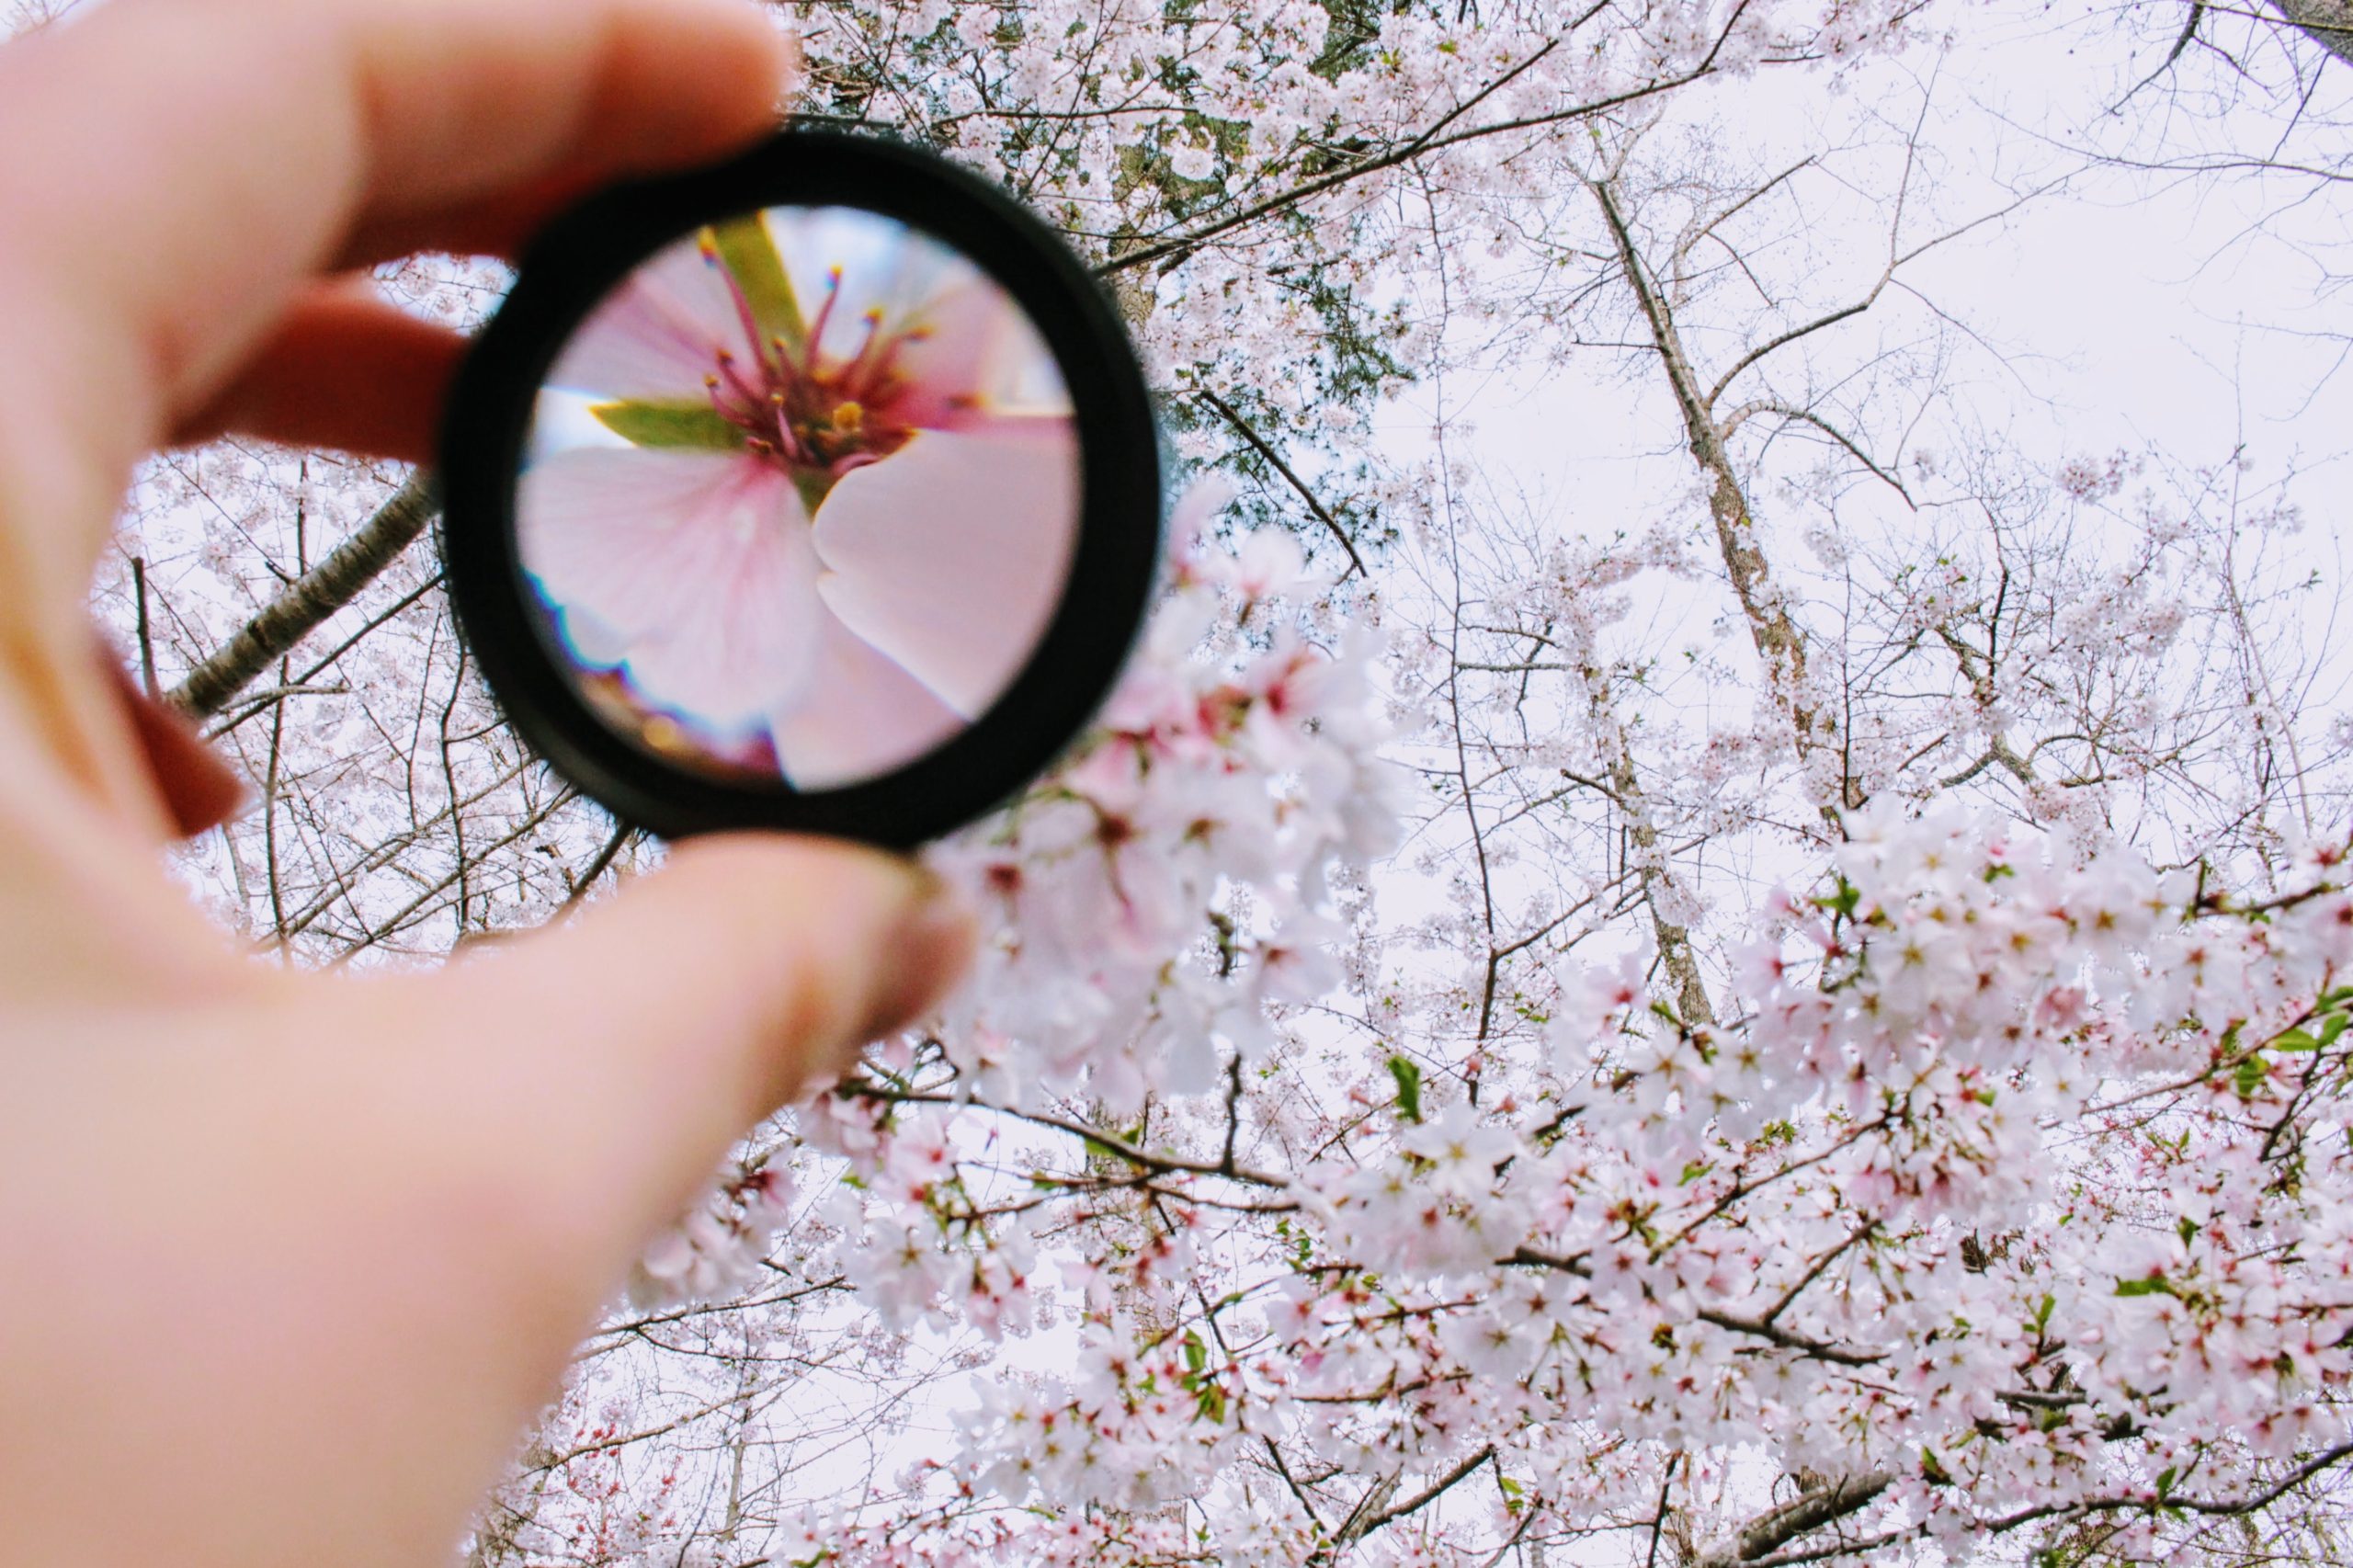 person-holding-round-framed-mirror-near-tree-at-daytime-979927